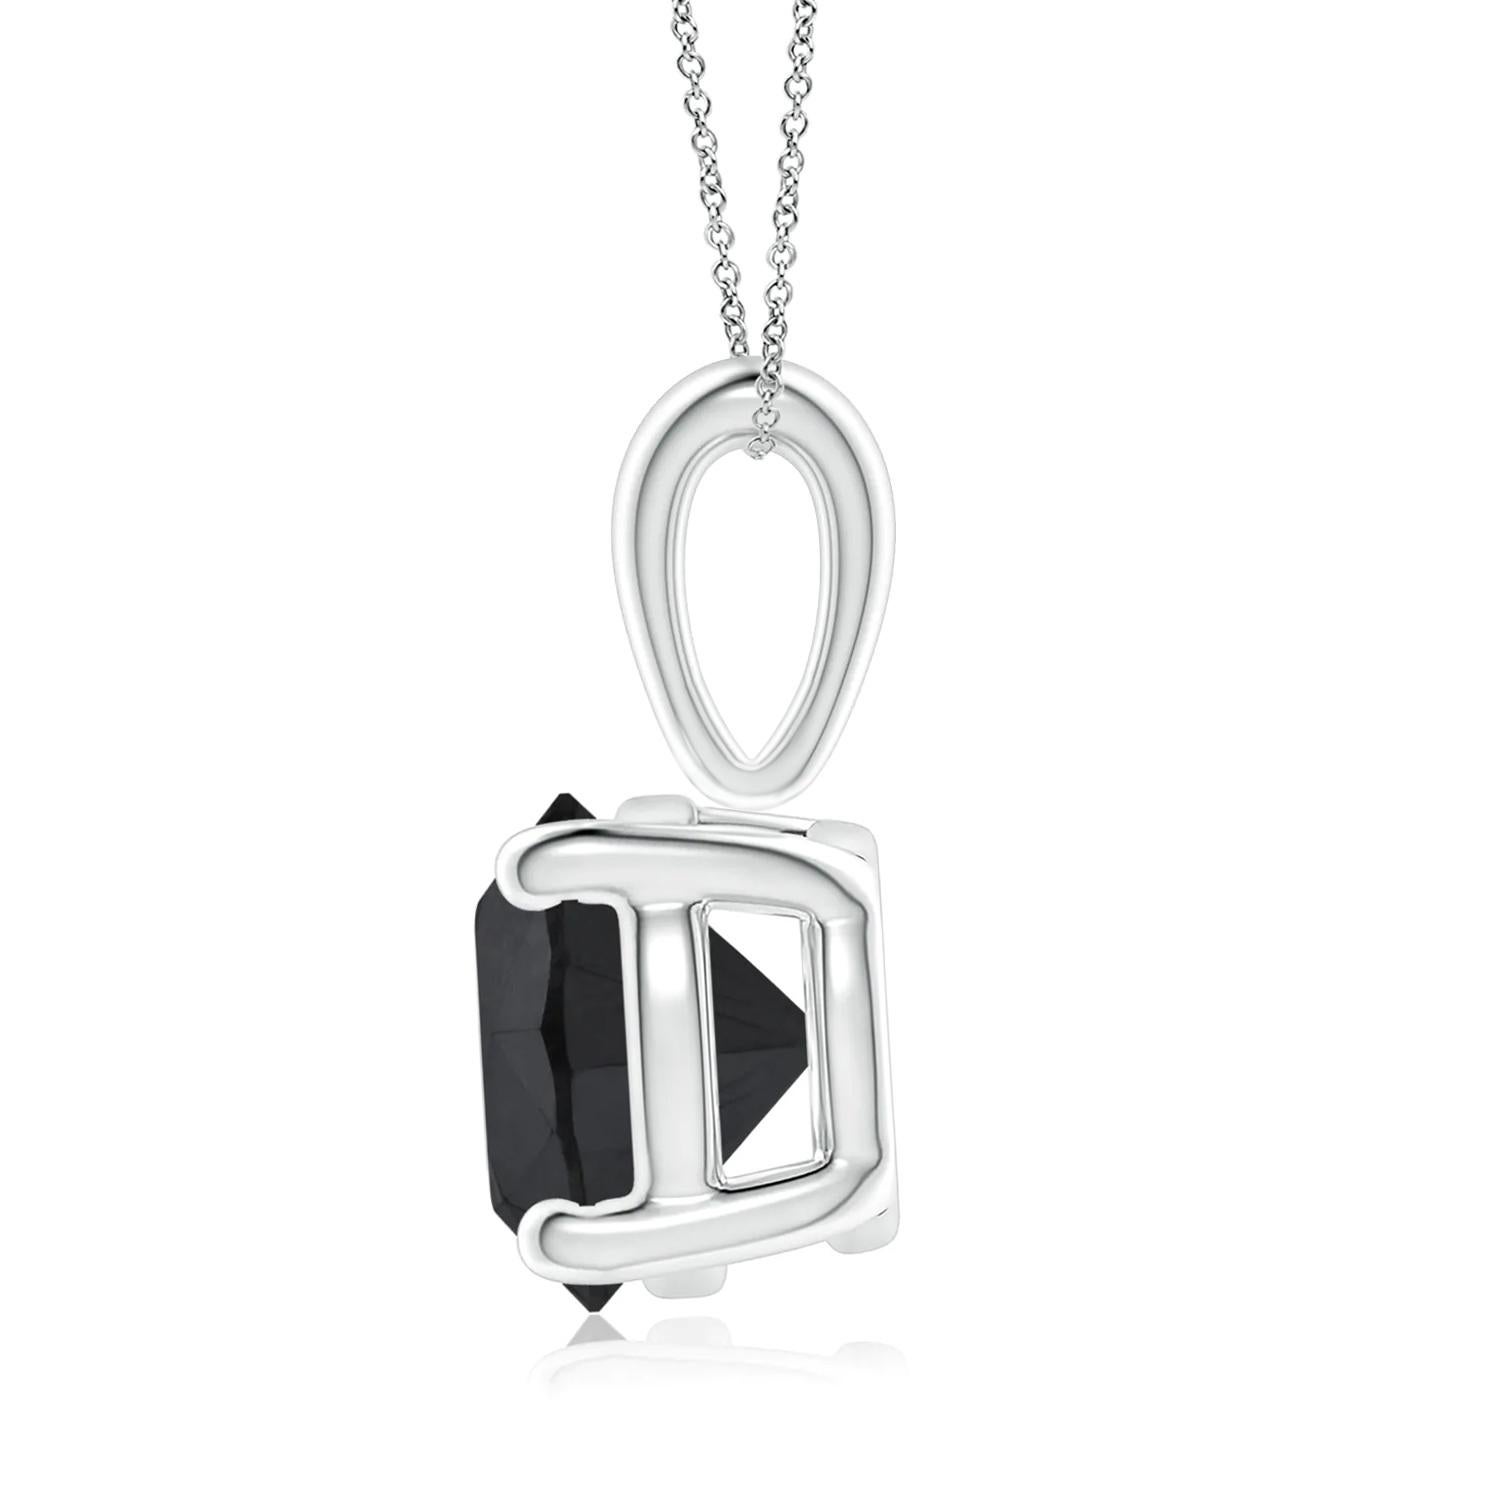 Surprise a special woman in your life with this large, breathtaking, statement hand crafted solitaire black diamond necklace. This eye-catching pendant necklace features a 1.25 carat round cut black diamond, measuring 6.06 mm in diameter set in 14k